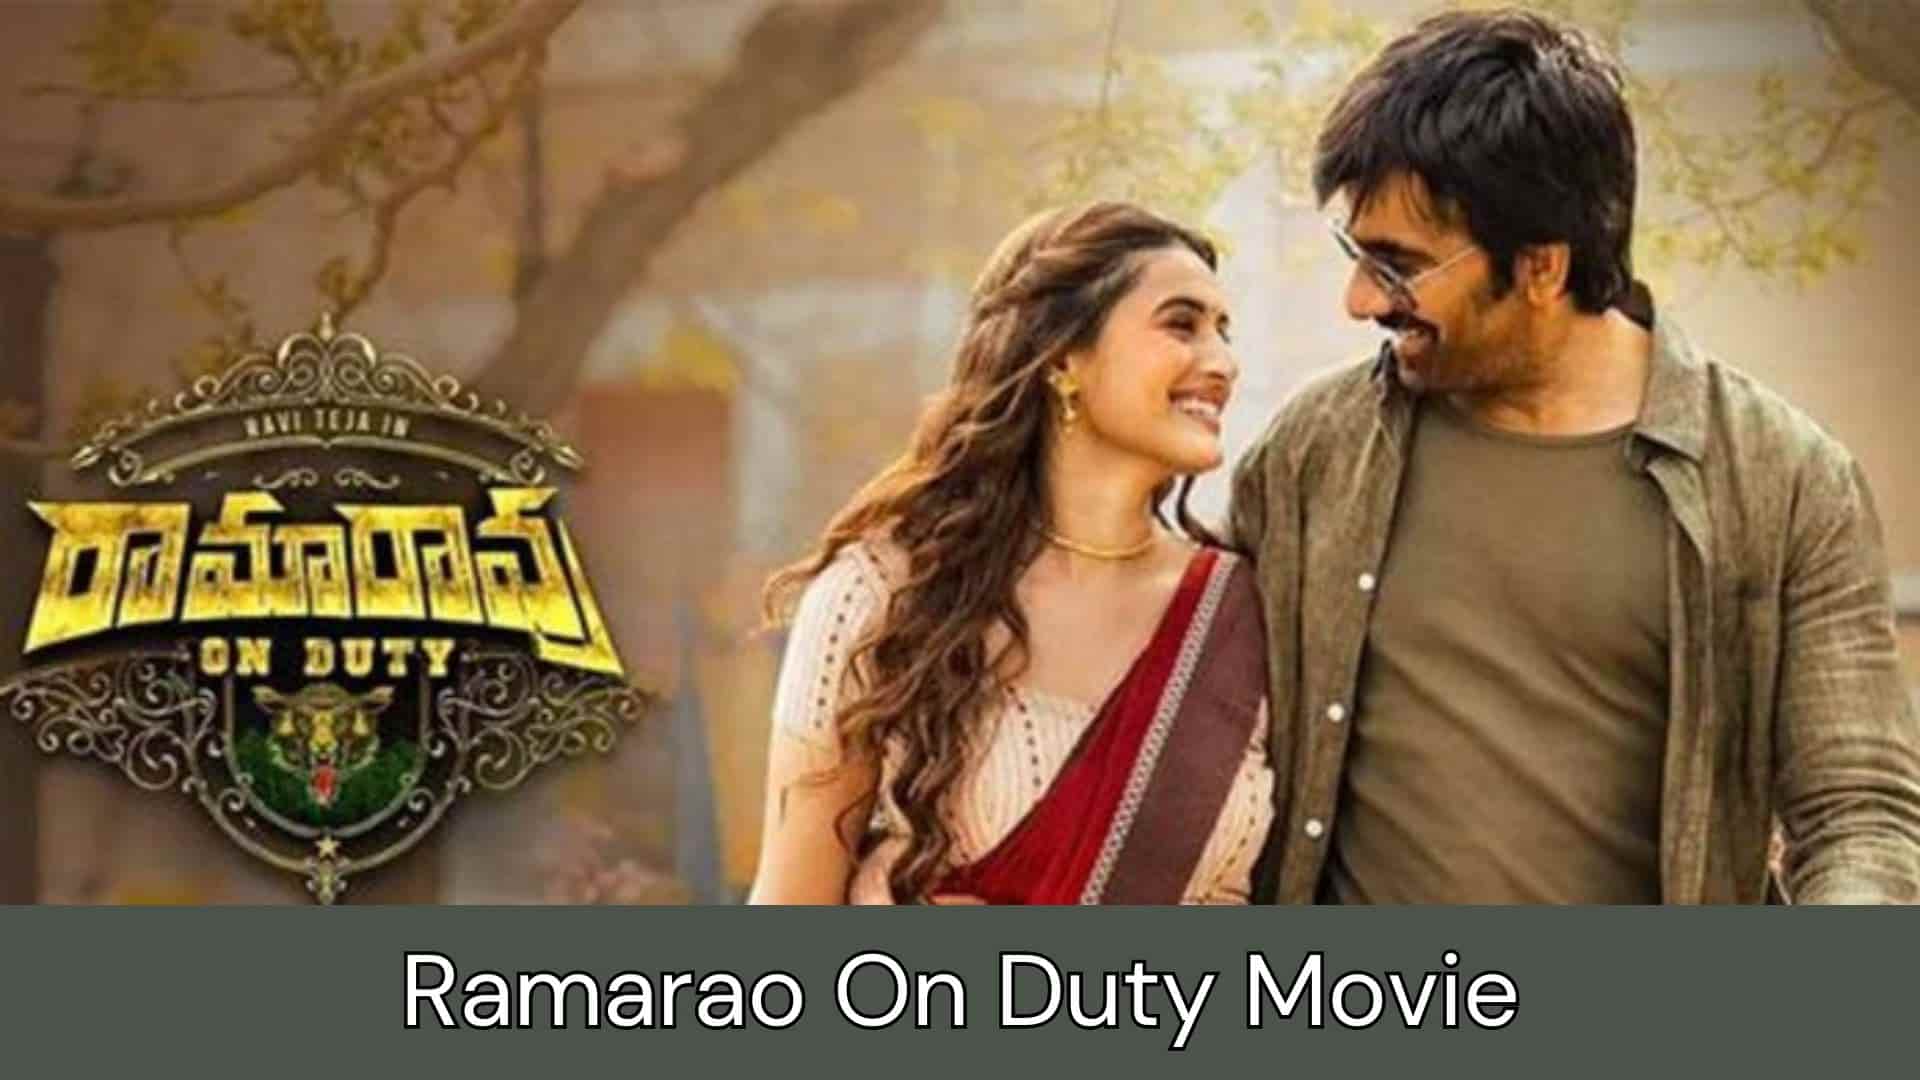 Ramarao On Duty Movie Release Date, Review, Heroine Name, Cast